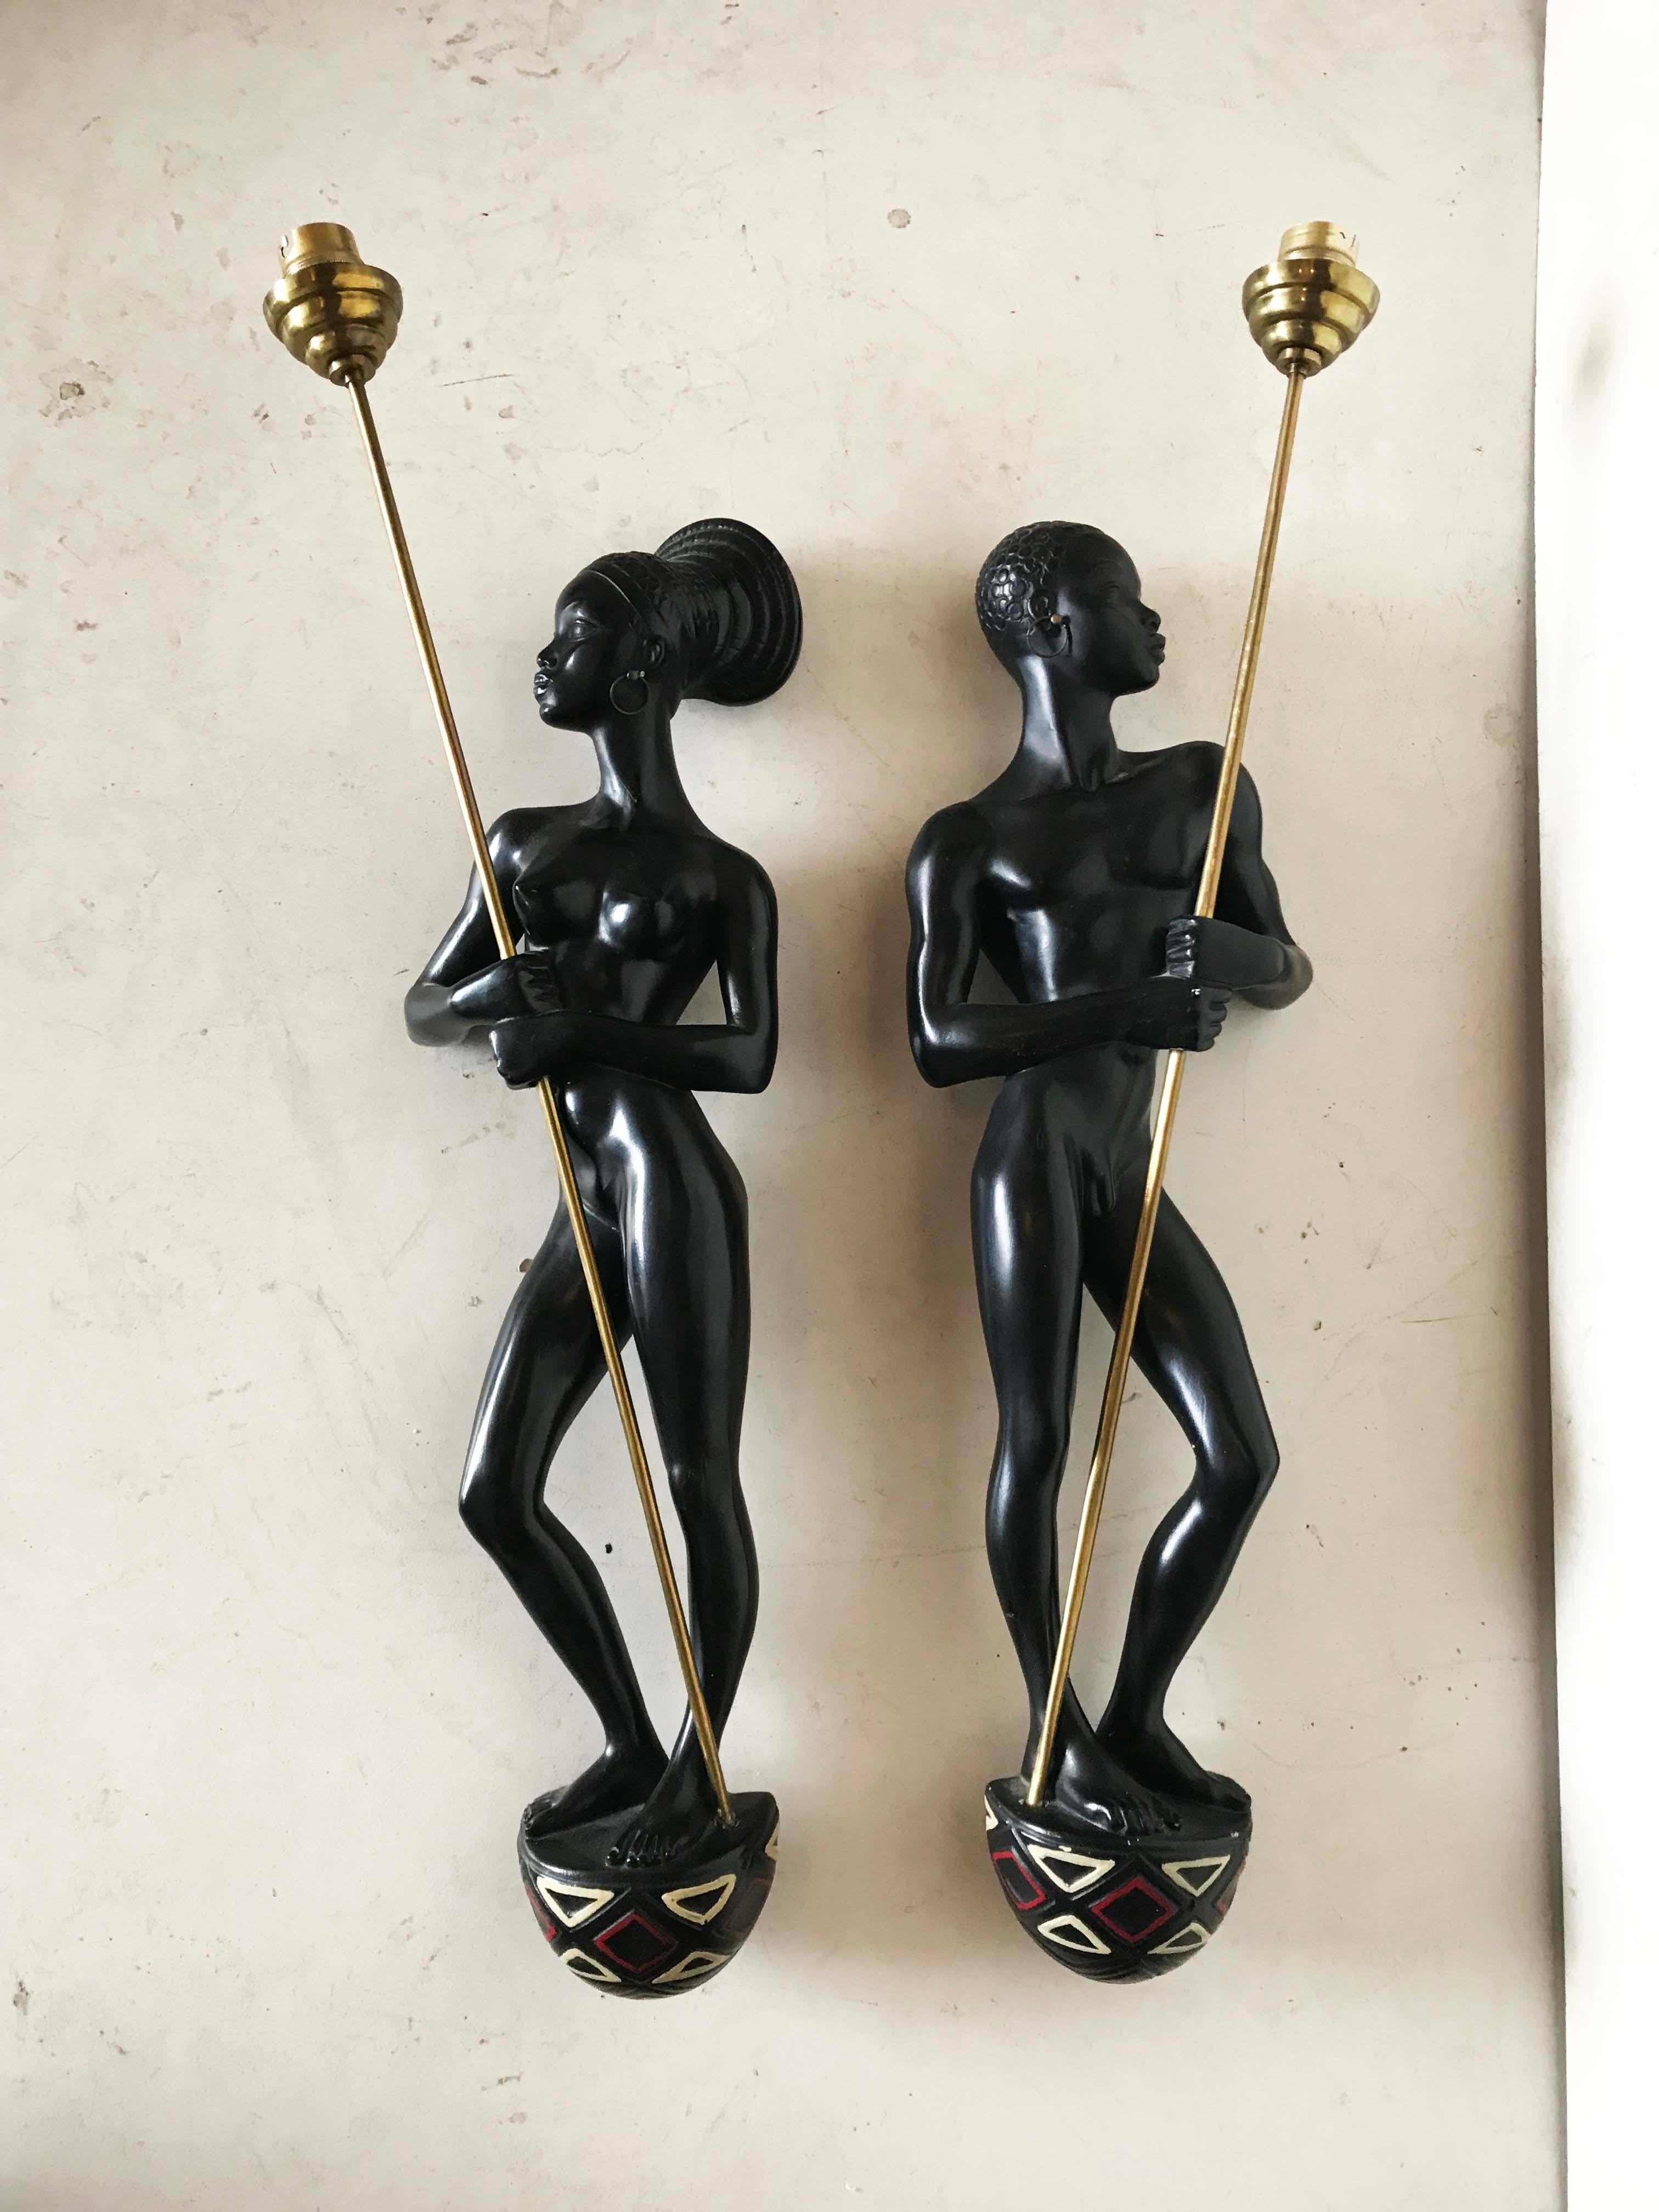 Superb pair of Art Deco ceramic sconces by Andre Carli (Léopold Anzegruber)
Original shades, perfect original condition.
1 bulb per sconce, 40 watts max bulb.
Have a look on our impressive collection of French and Italian Mid Century Period